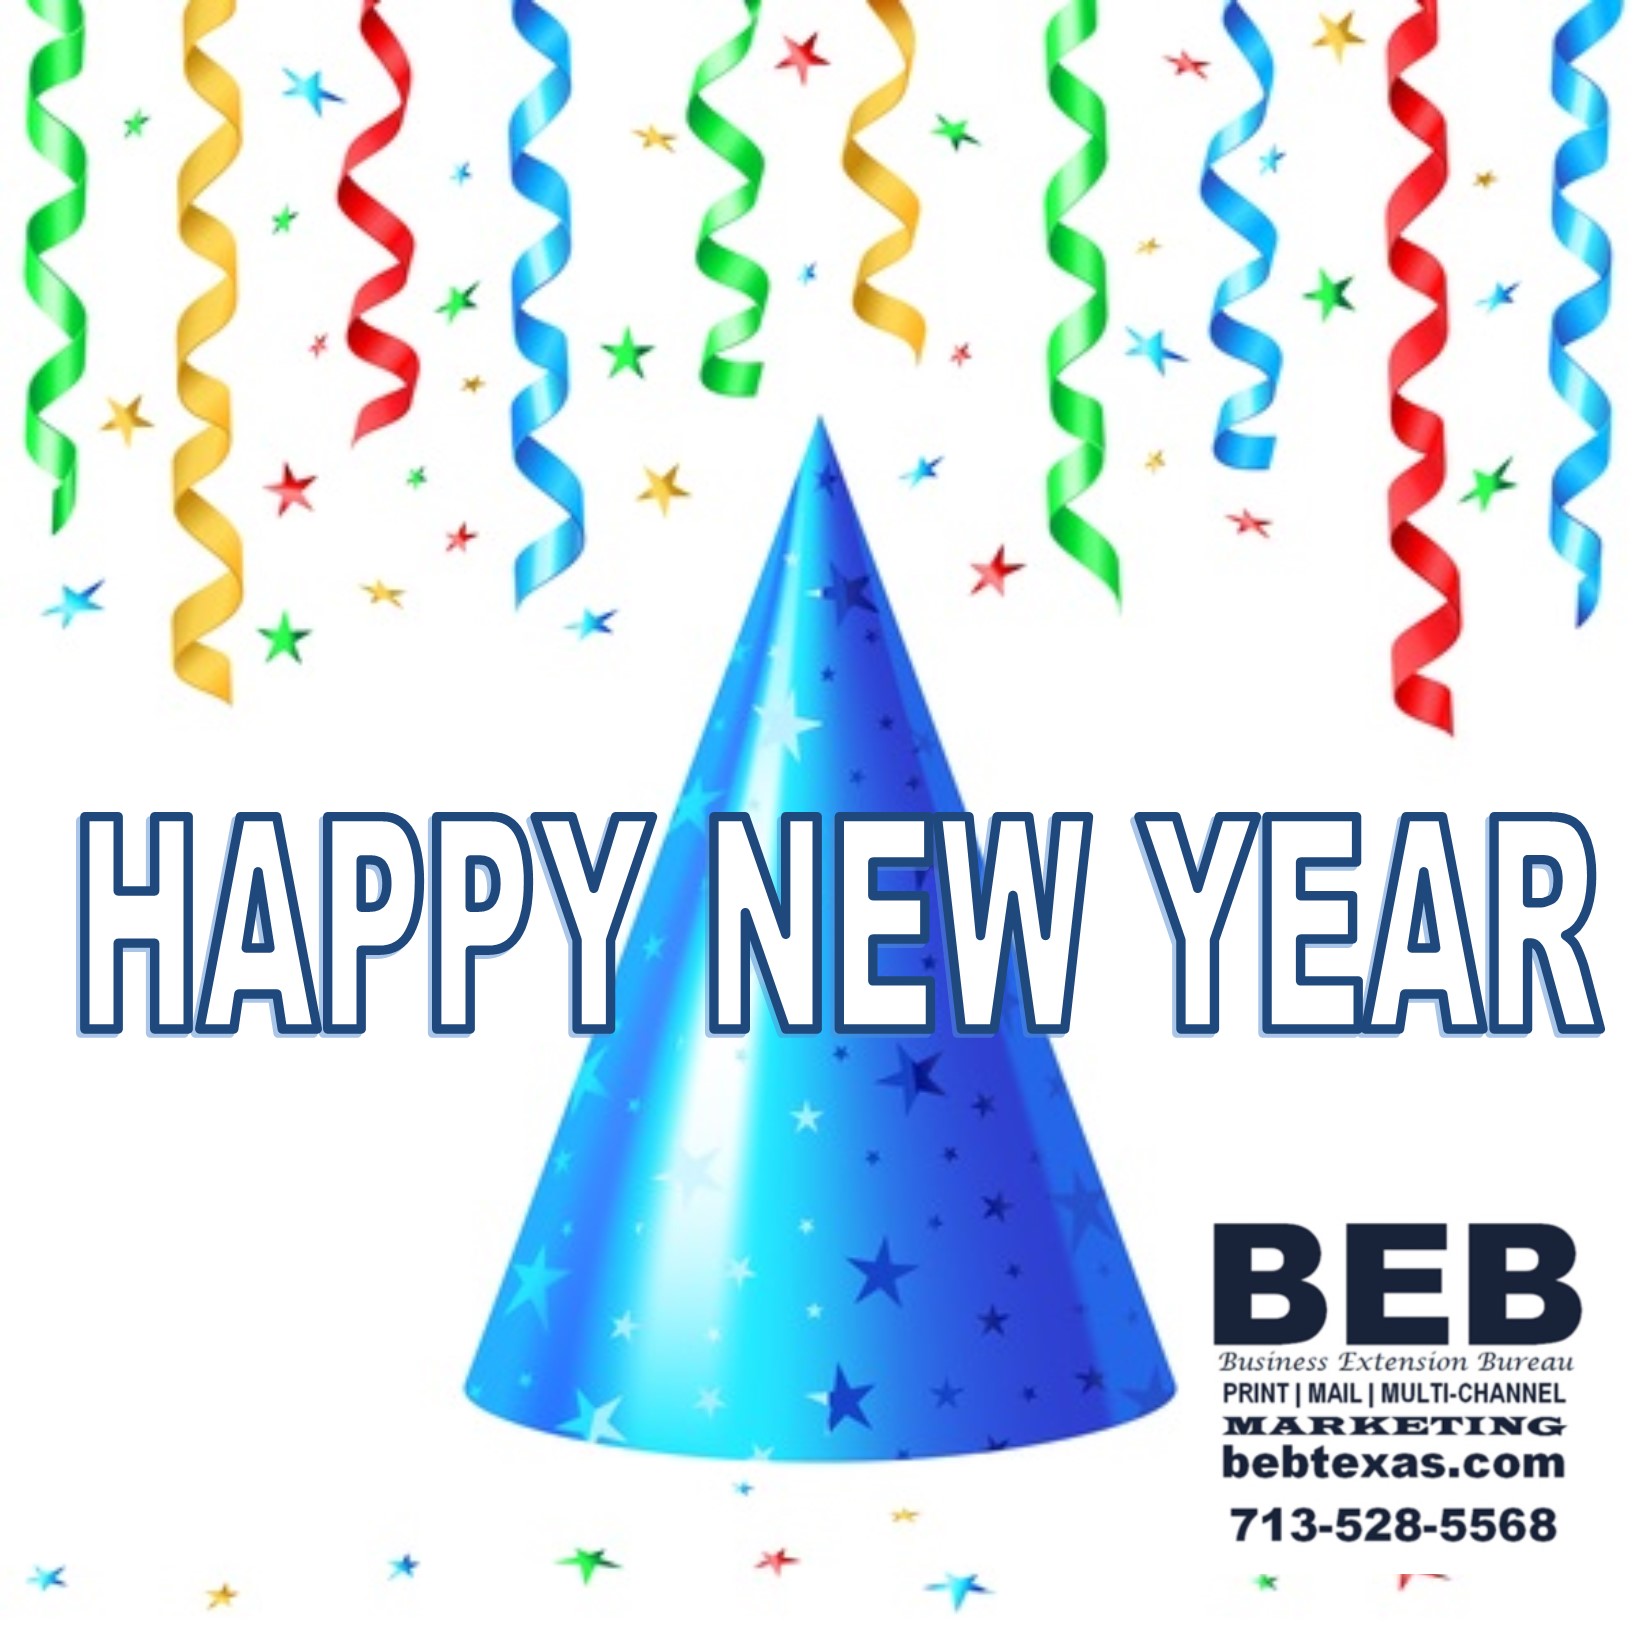 HAPPY NEW YEAR FROM BEB